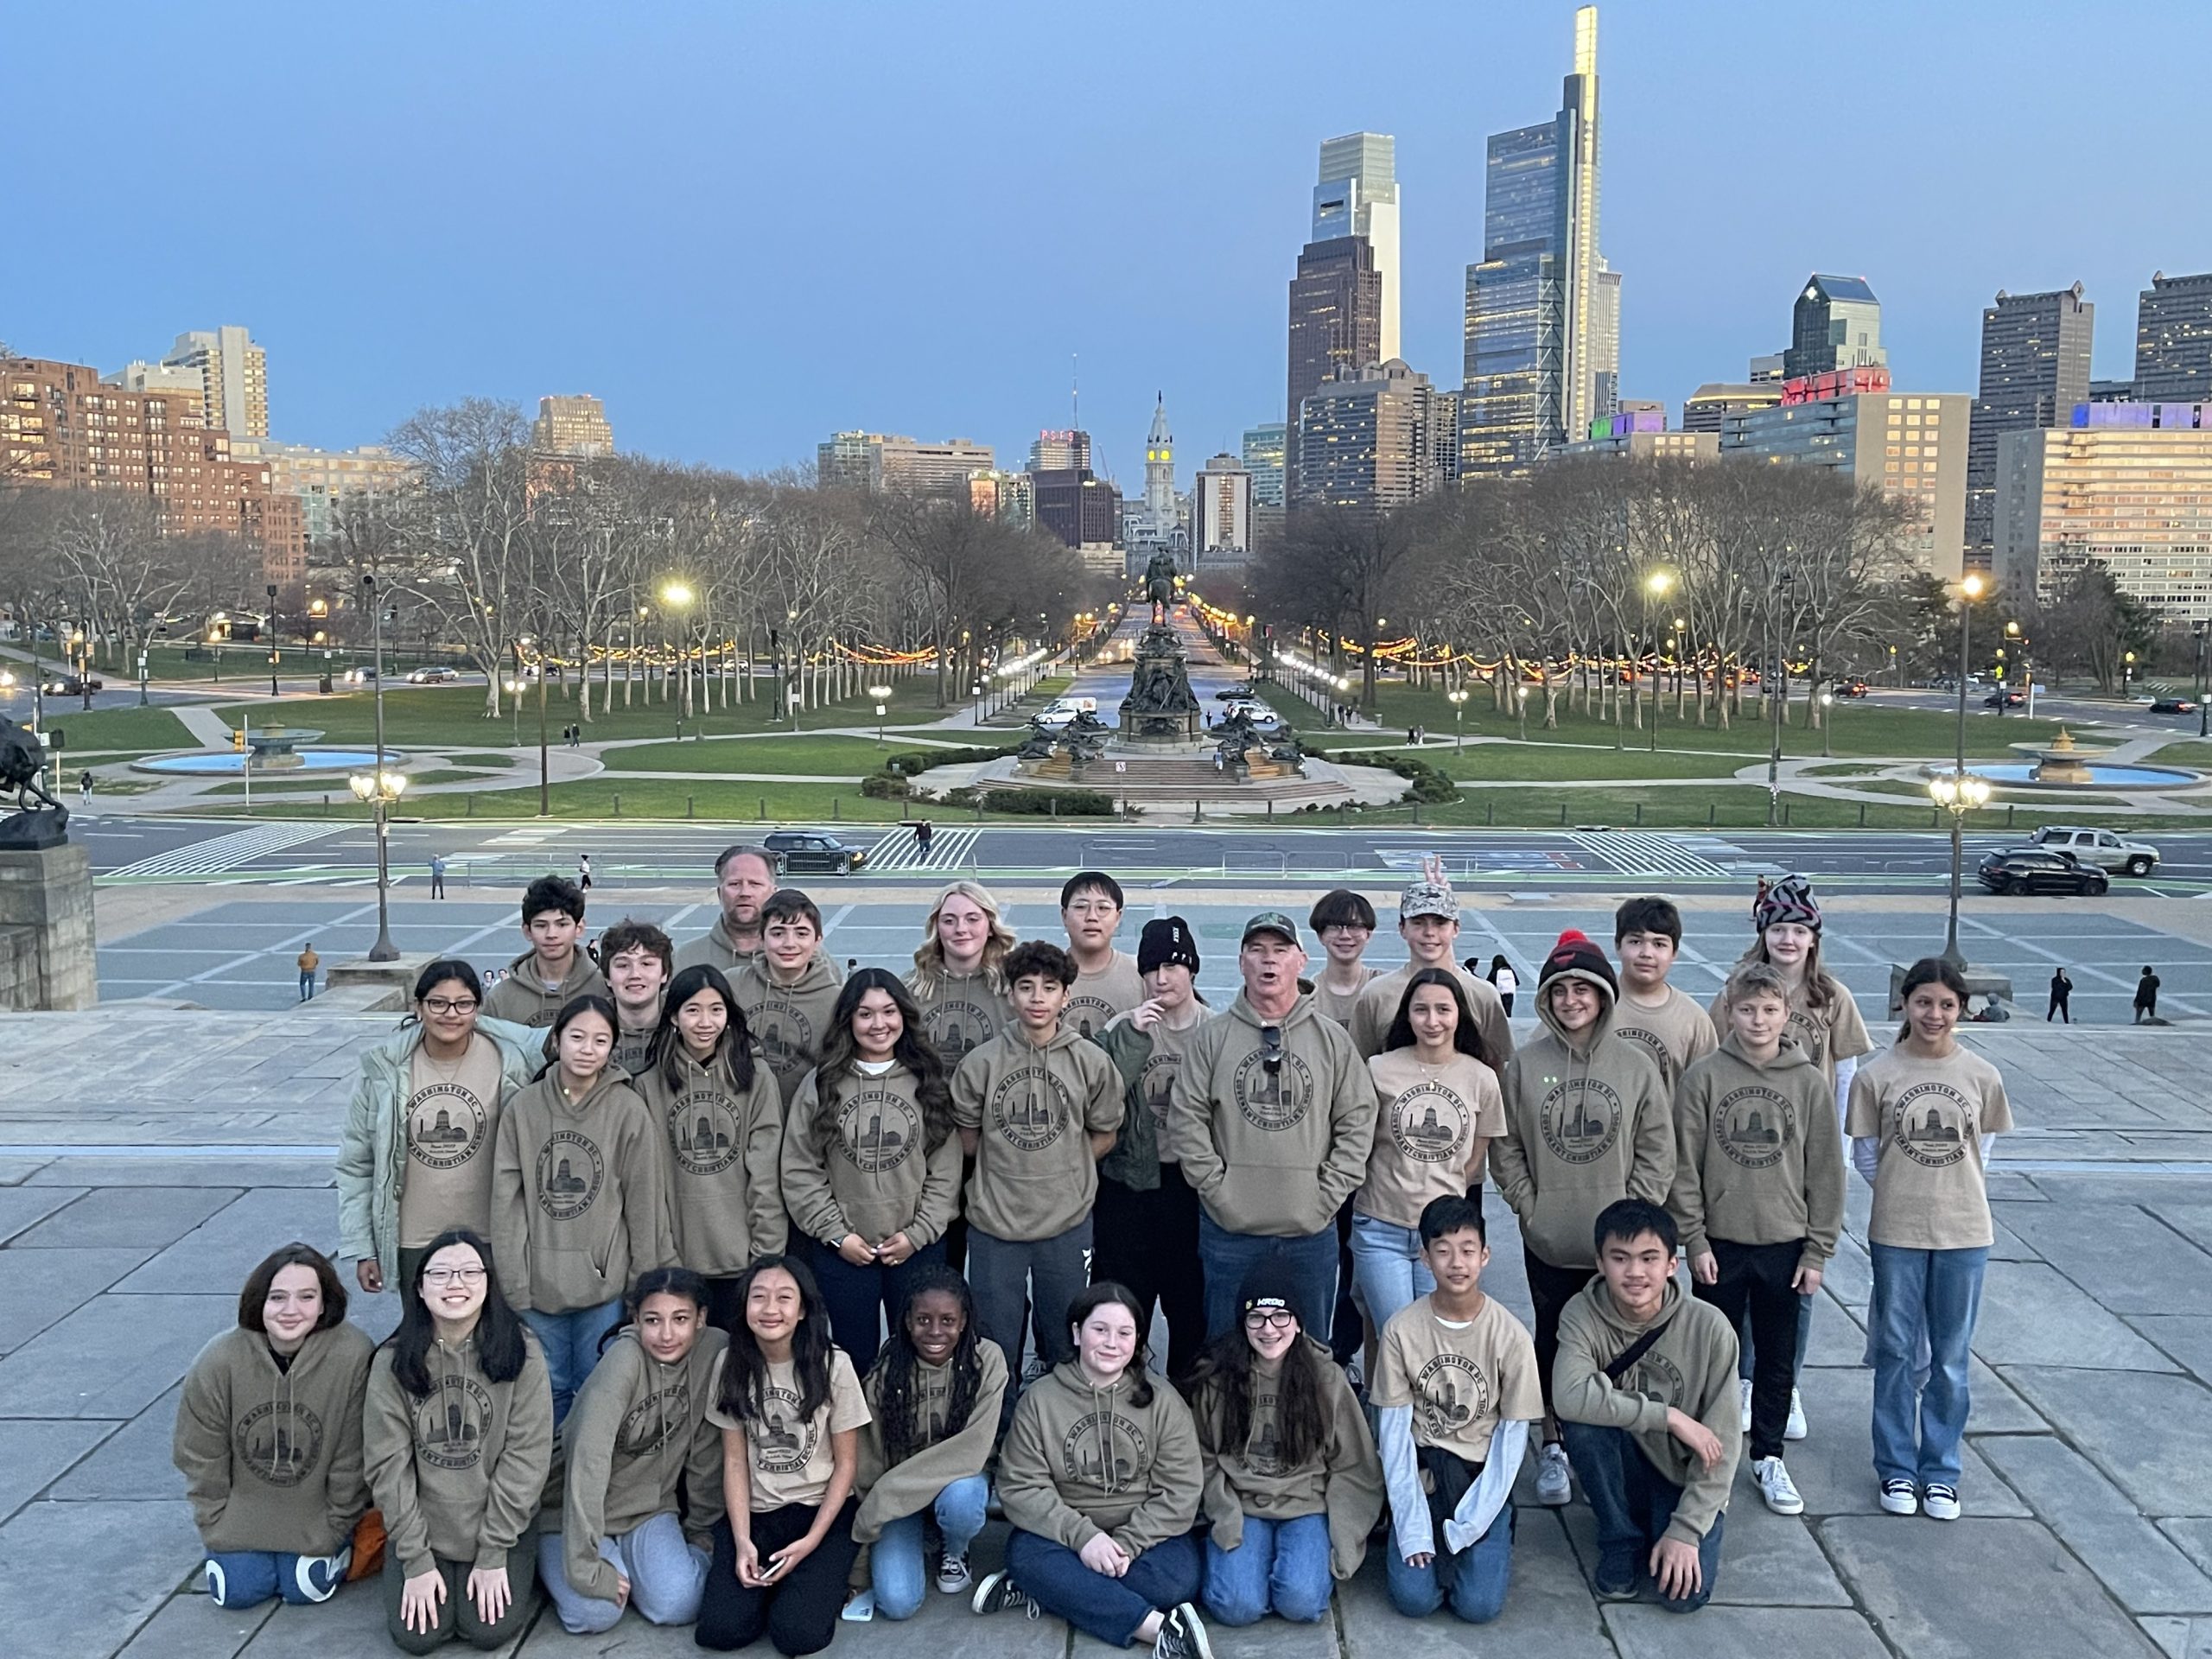 Group of middle school students posing in Philadelphia PA, with a cityscape in the background